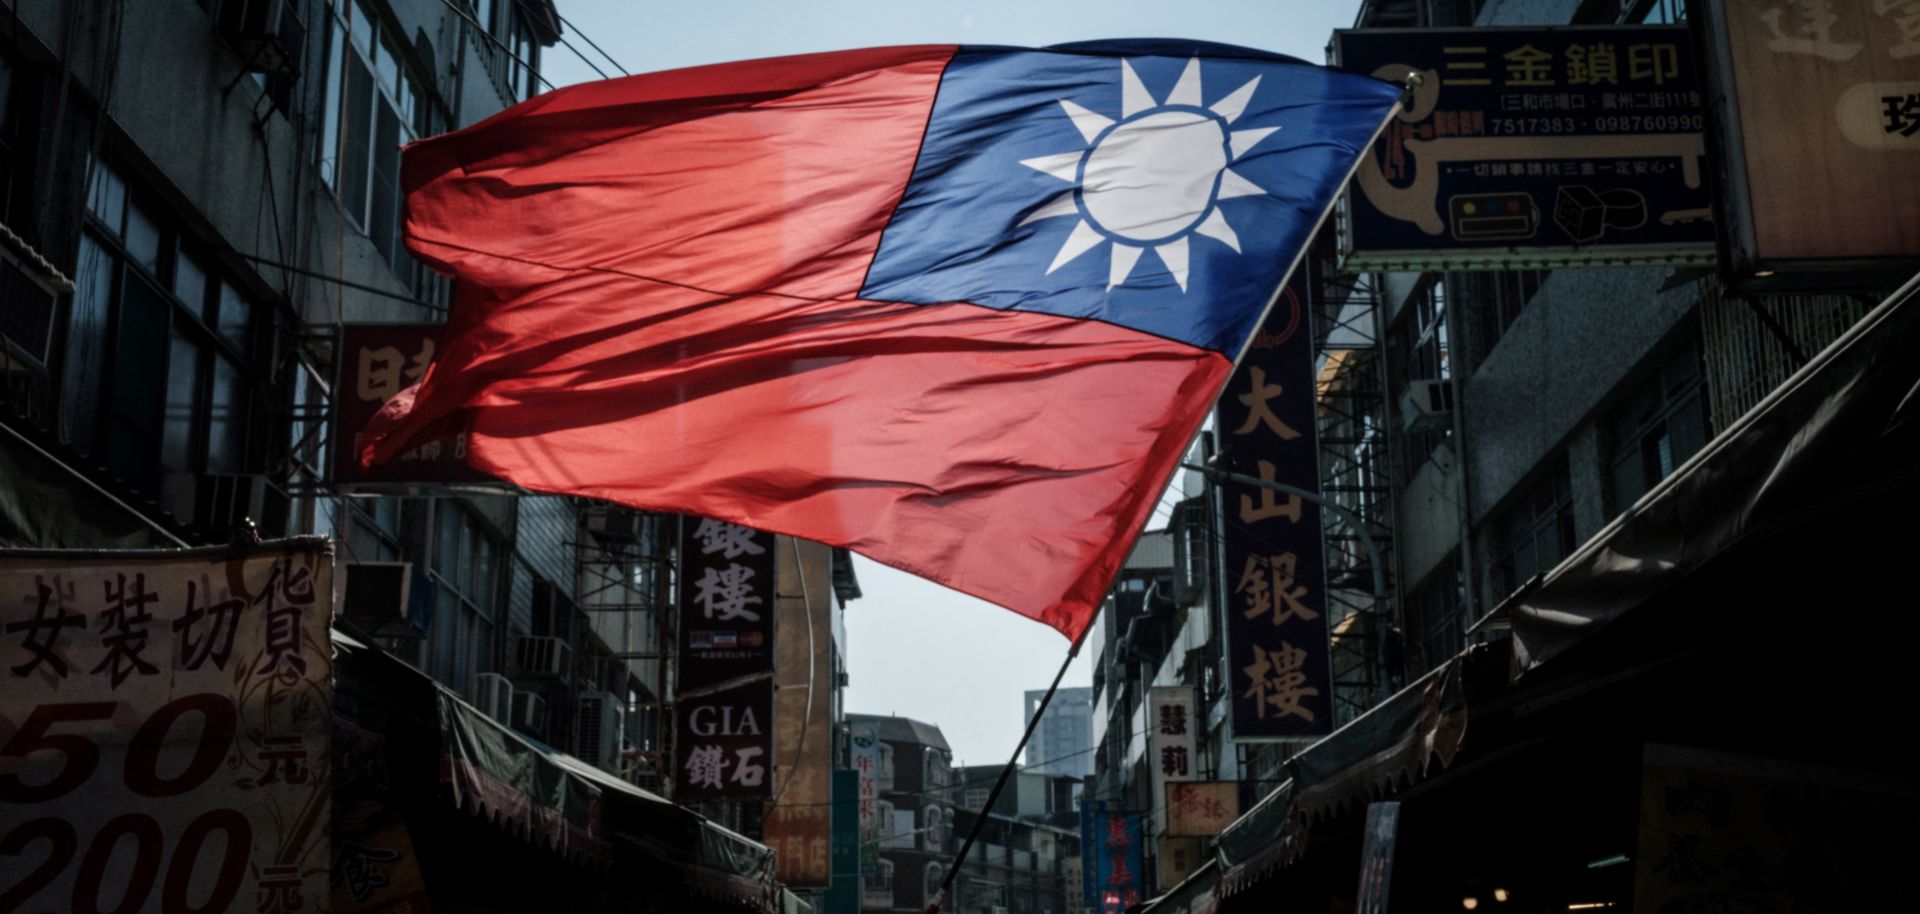 A supporter of the main opposition Kuomintang (KMT) waves Taiwan's national flag during a campaign rally at the Sanhe Market in Kaohsiung, Taiwan, on Jan. 10, 2024.